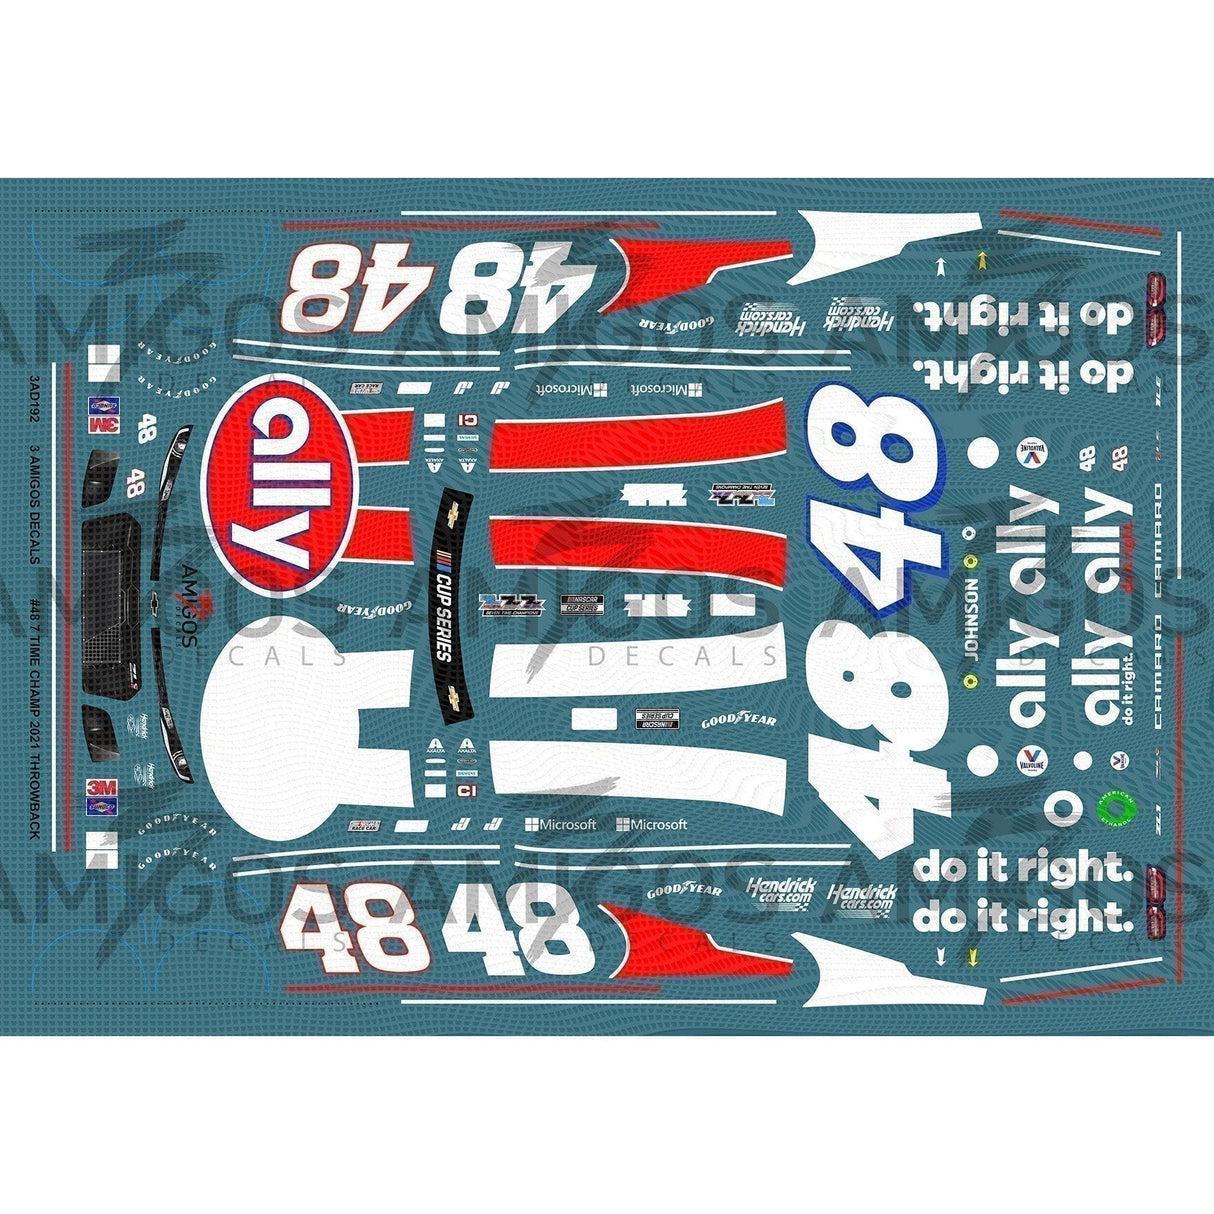 3 Amigos Decals #48 JIMMY JOHNSON ALLY 7 TIME CHAMP 2020 CAMARO THROWBACK 1:24 DECAL SET